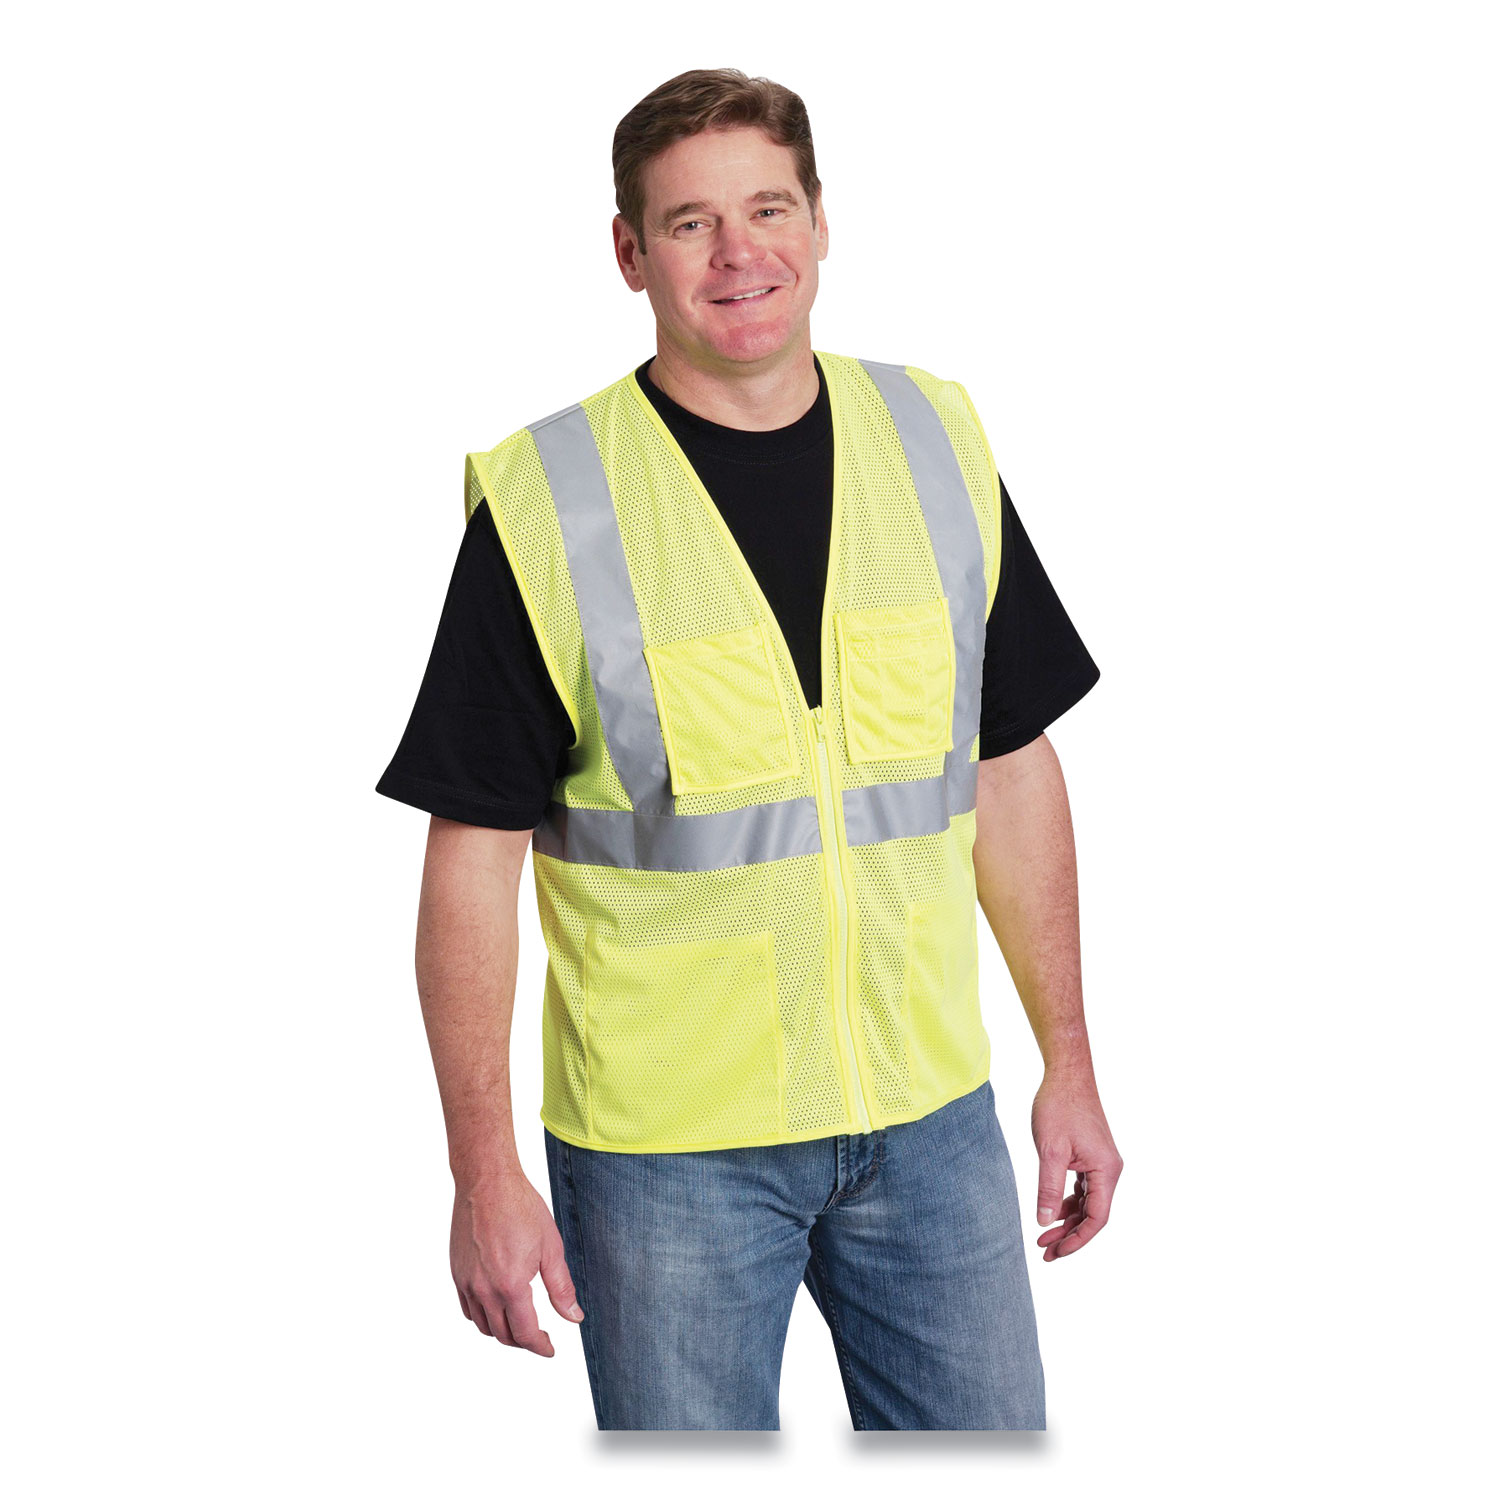 PIP Zipper Safety Vest, Hi-Viz Lime Yellow, 2 Lower and 2 Upper Chest Pockets, Large